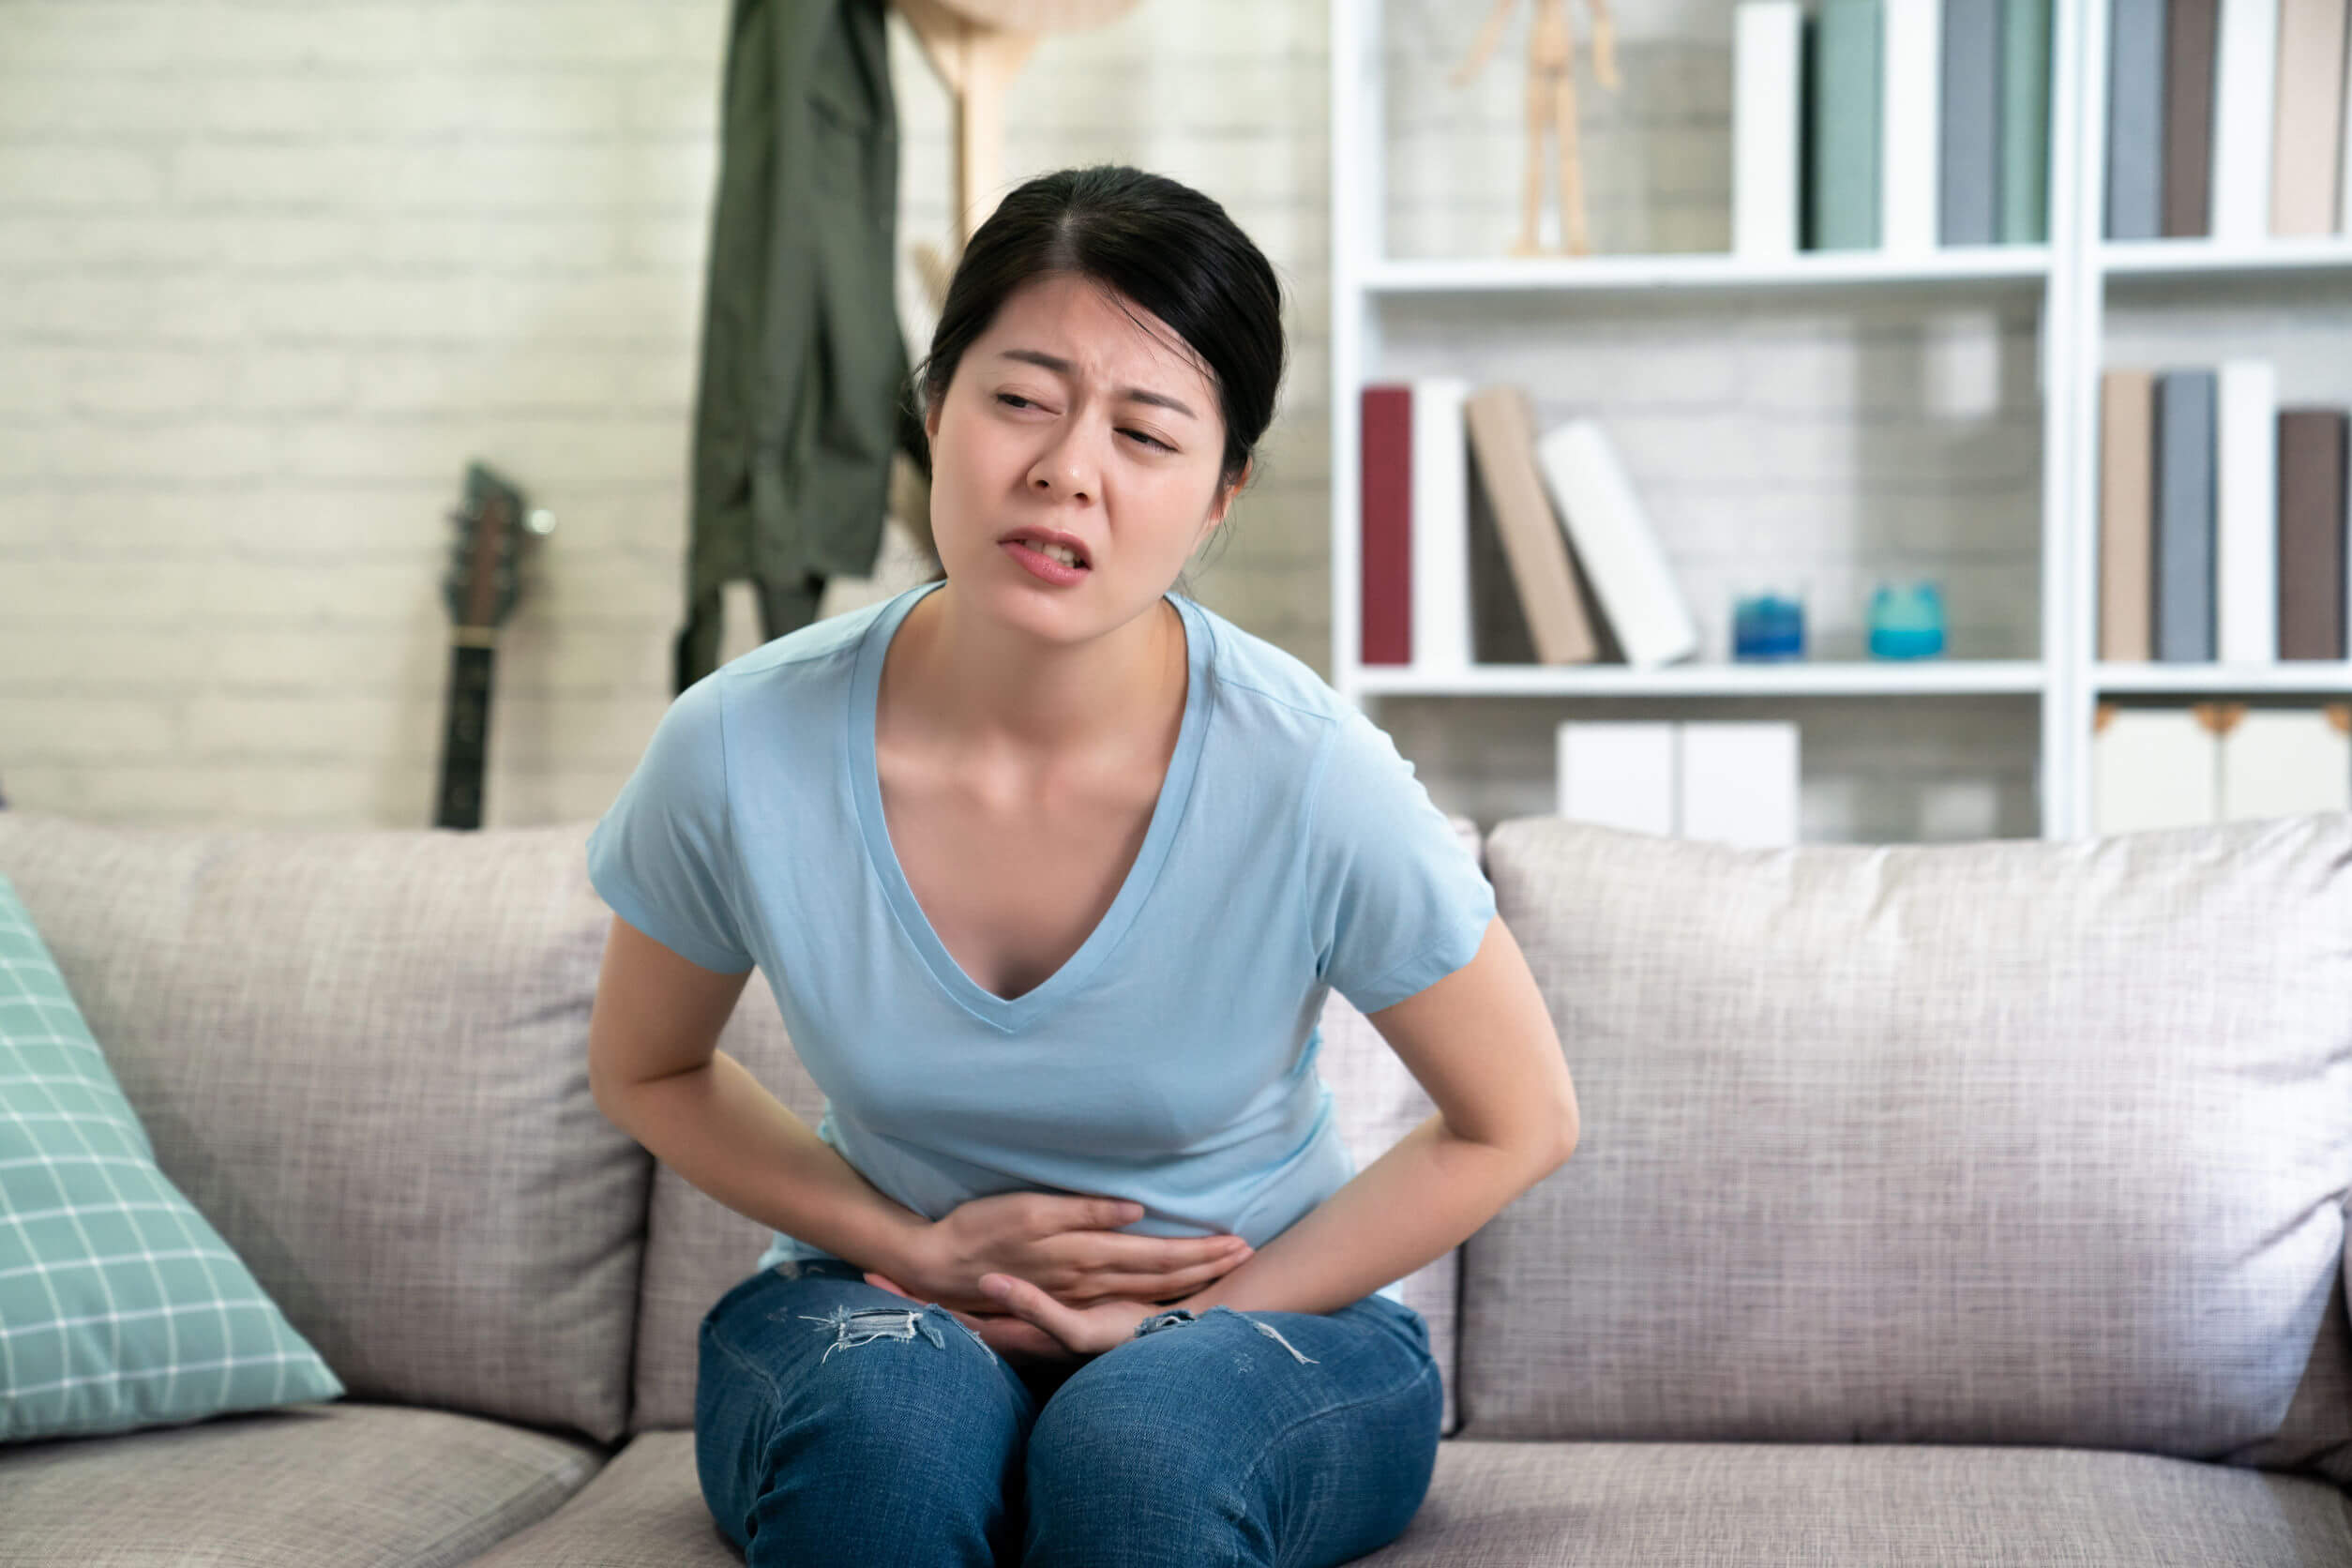 Abdominal pain occurs in most cases of diarrhea.